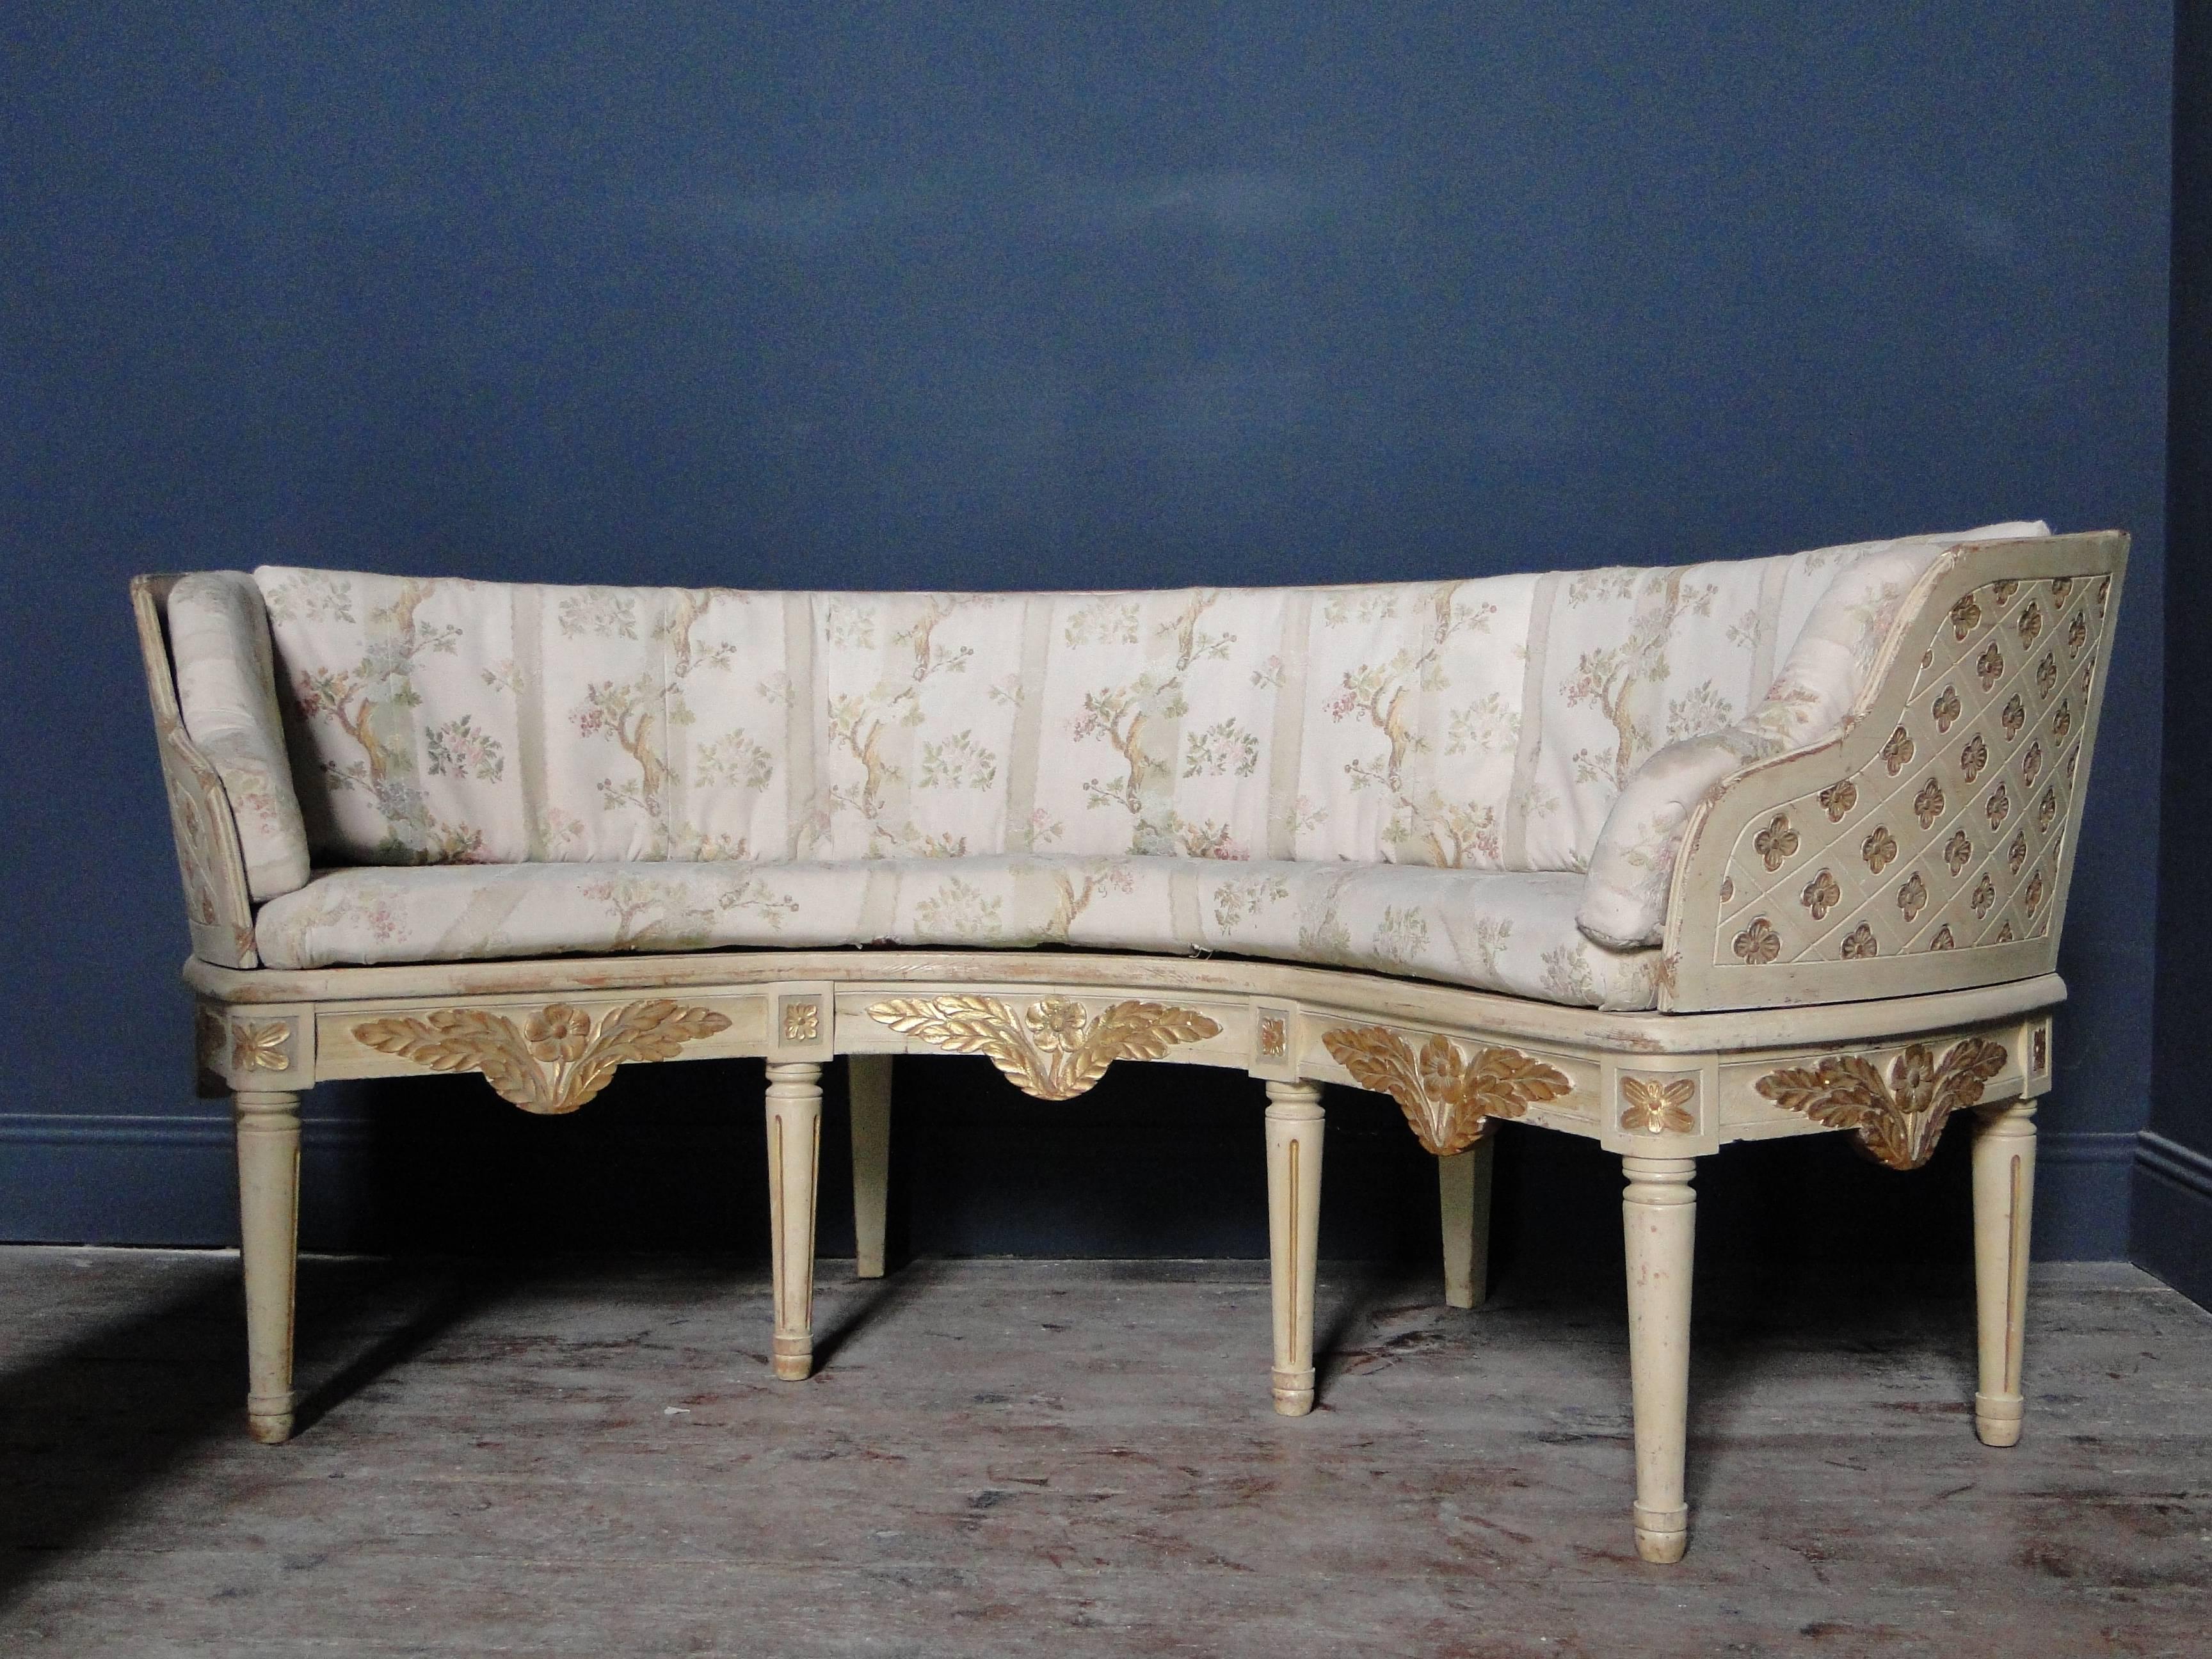 Swedish sofa, curved formed, painted wood, partly gilded. Measures 192 cm long and 60 cm deep. Seat height 49cm. The wooden back part is removable .Faded fabric cushions which are original. Origin Fållans Gård, Trångsund, Sweden.